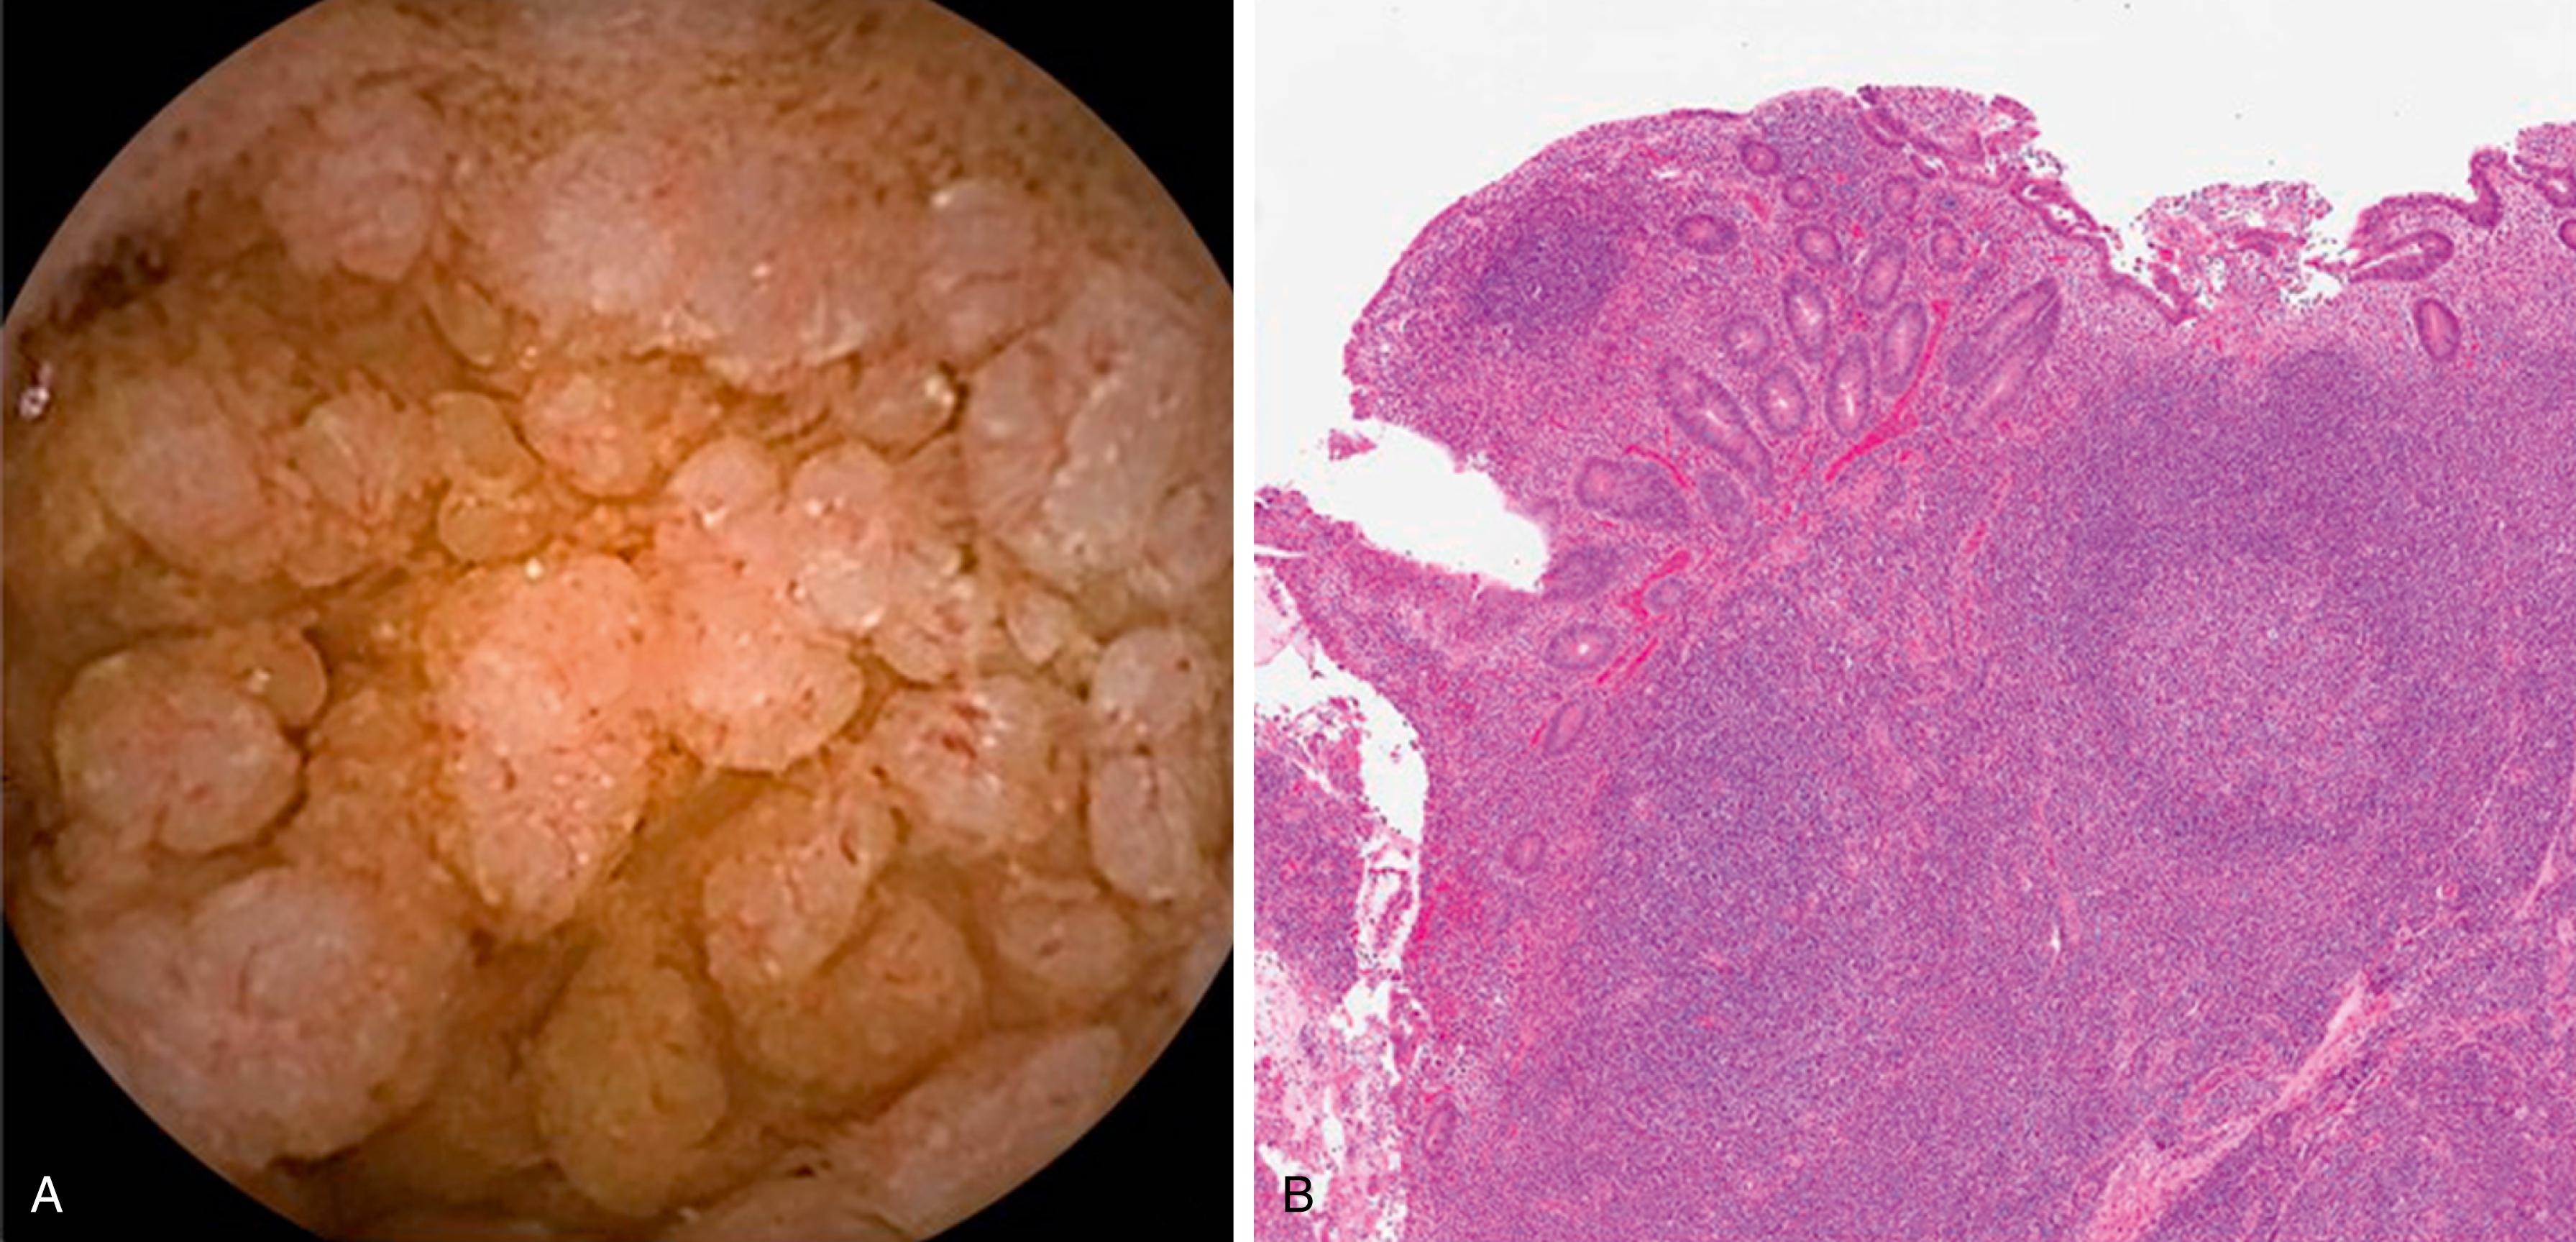 Fig. 47.1, Lymphonodular Hyperplasia. (A) Capsule endoscopy of lymphoid hyperplasia in the ileum. (B) Prominent lymphoid follicles with reactive germinal centers distort the normal villous architecture of the small bowel.